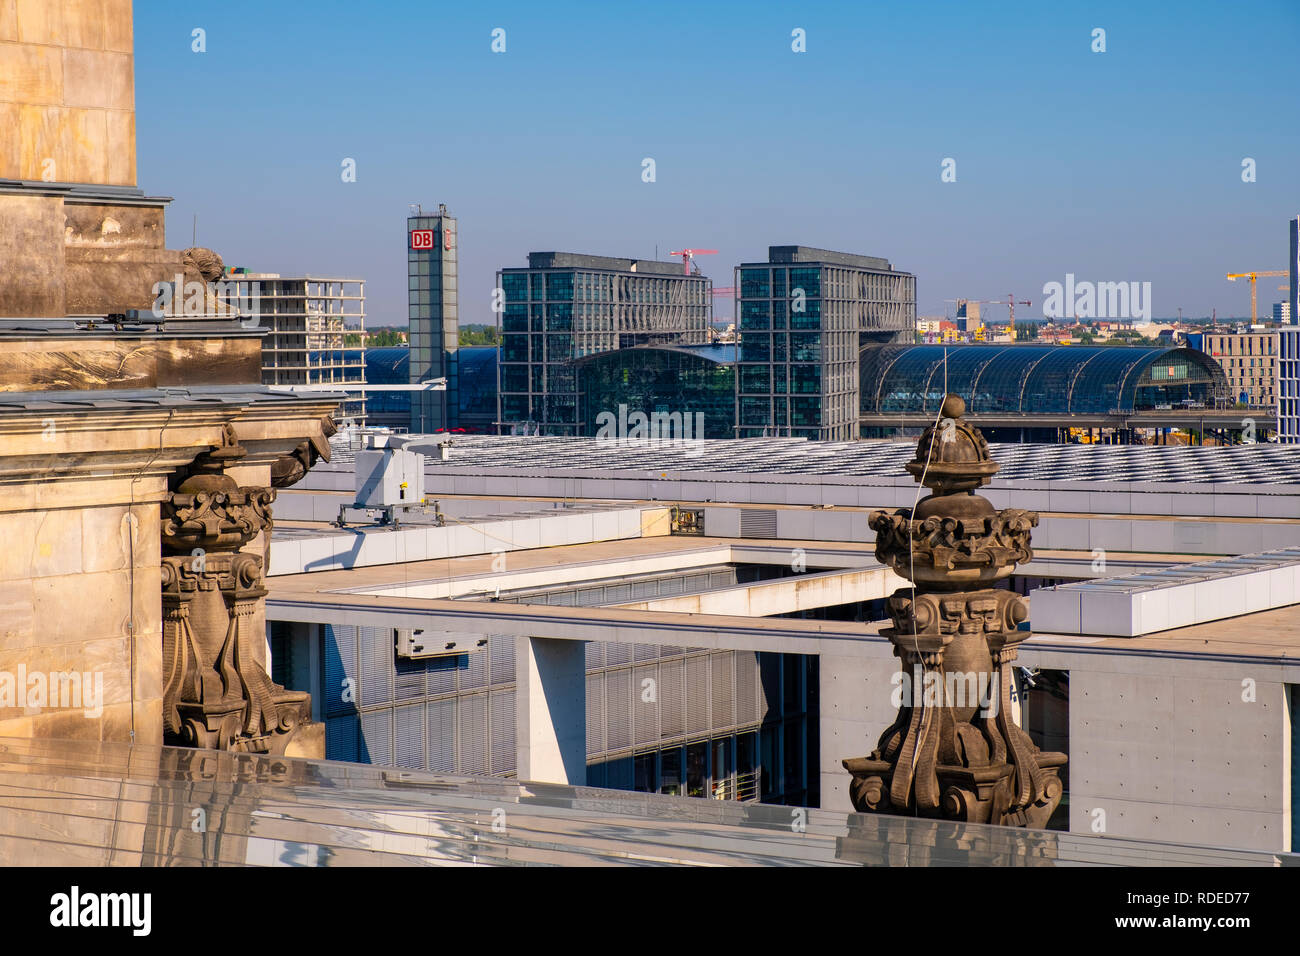 Berlin, Berlin state / Germany - 2018/07/31: Panoramic view of northern part of city with the Main Railway station - Hauptbahnohof - at Spree river Stock Photo